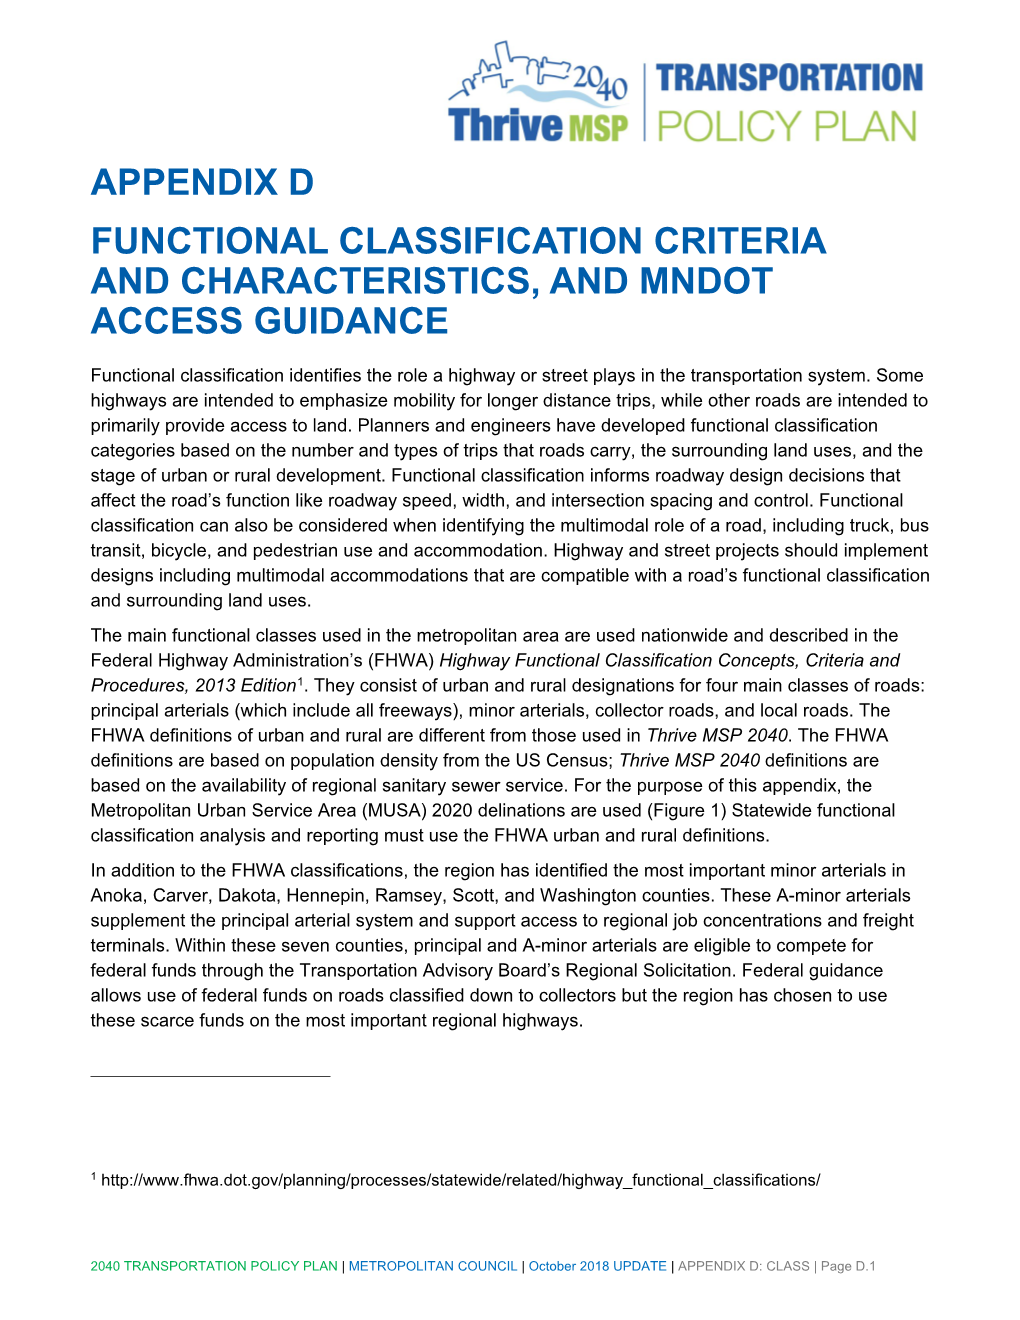 Functional Classification Criteria and Characteristics, and Mndot Access Guidance